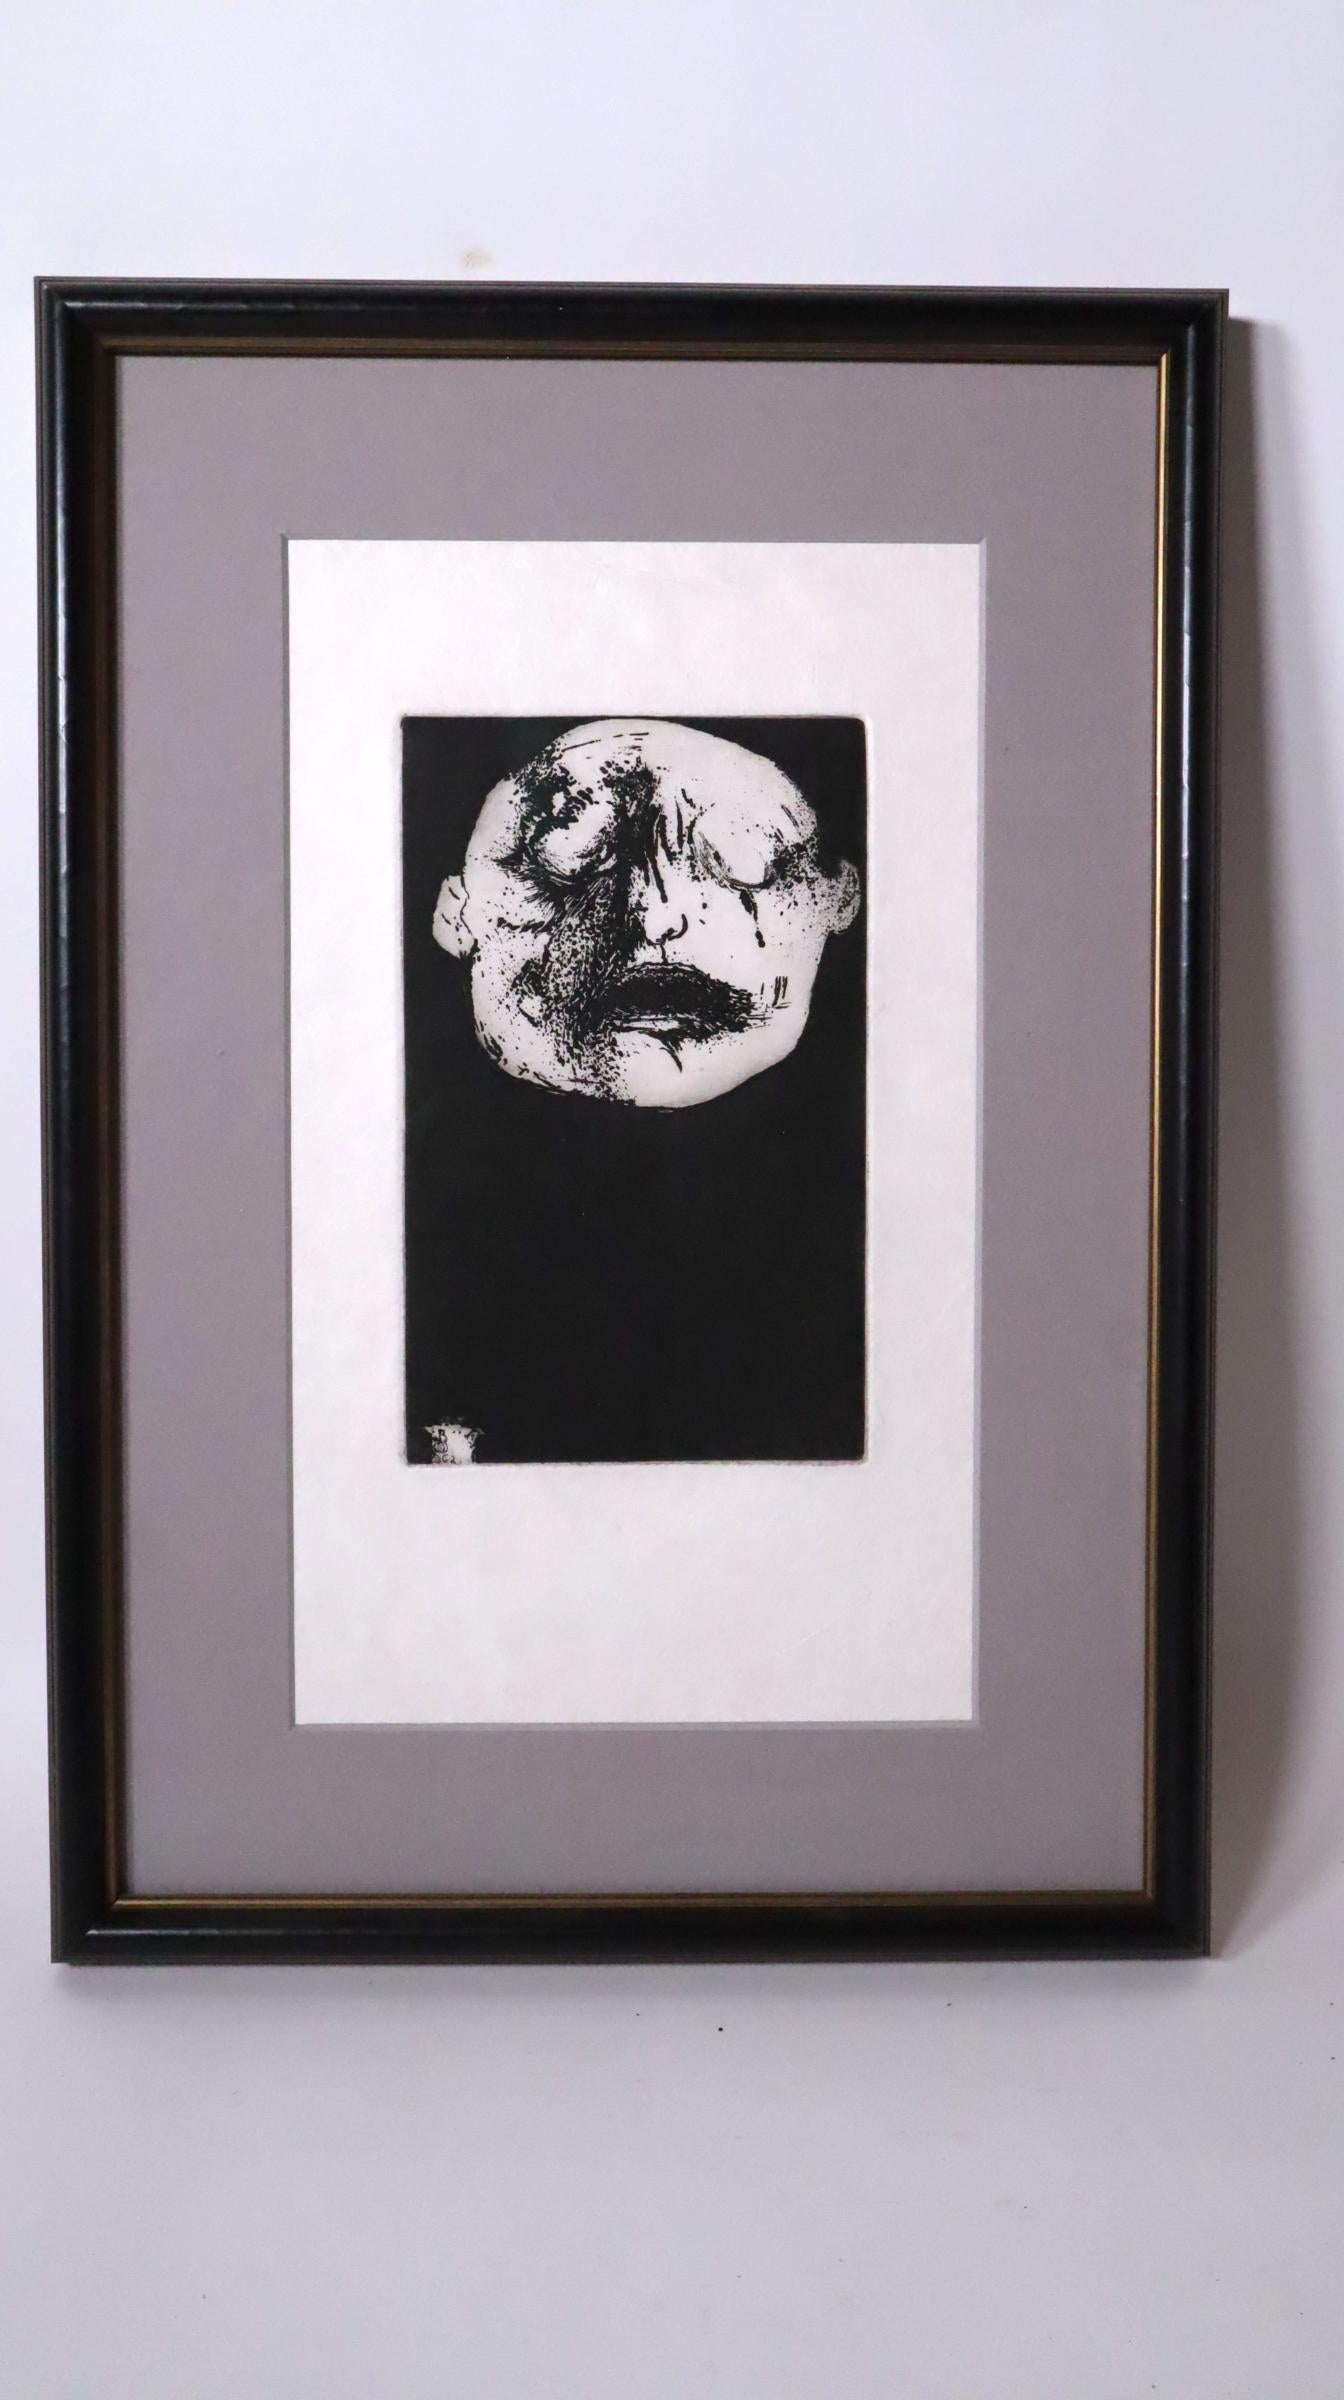 Three framed etchings, trial proofs INVENTORY CLEARANCE SALE - Gray Figurative Print by Leonard Baskin